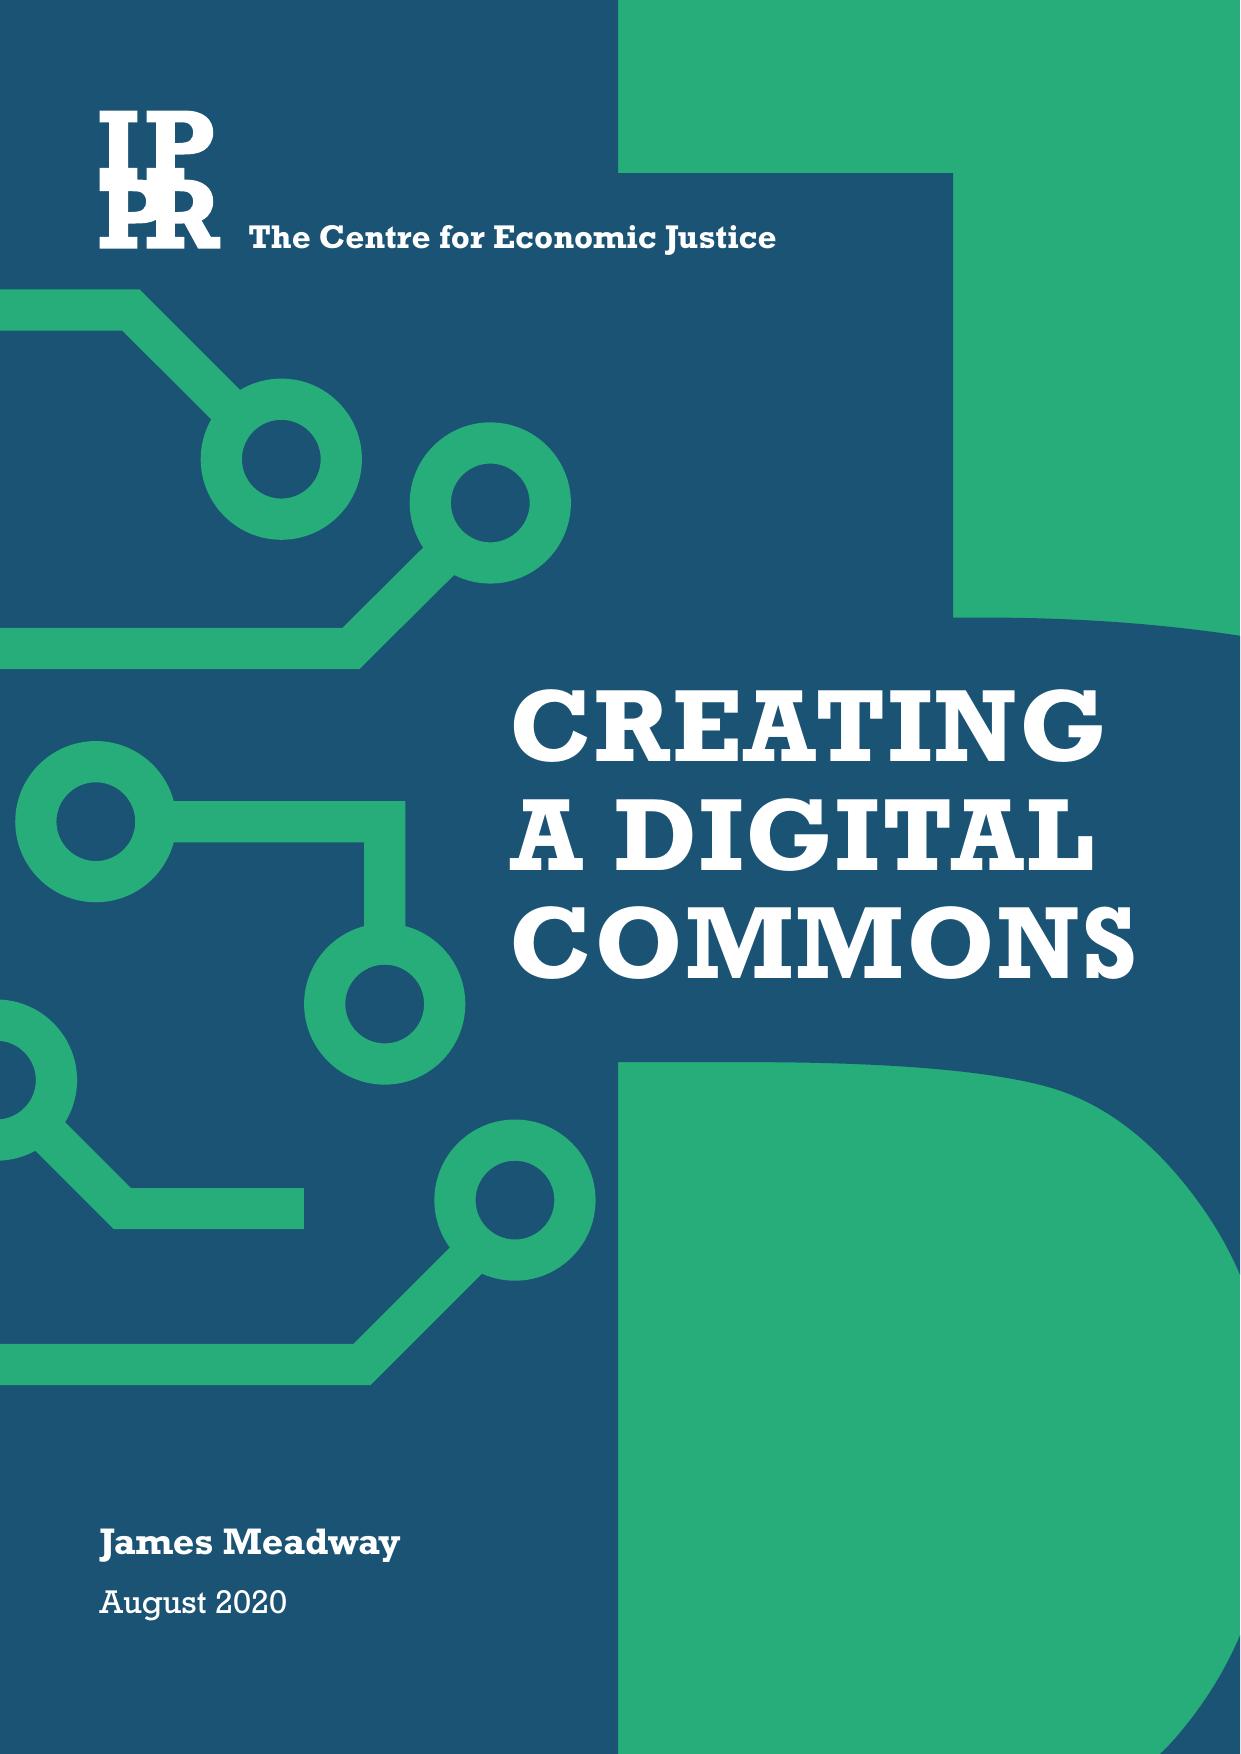 Creating a digital commons covers